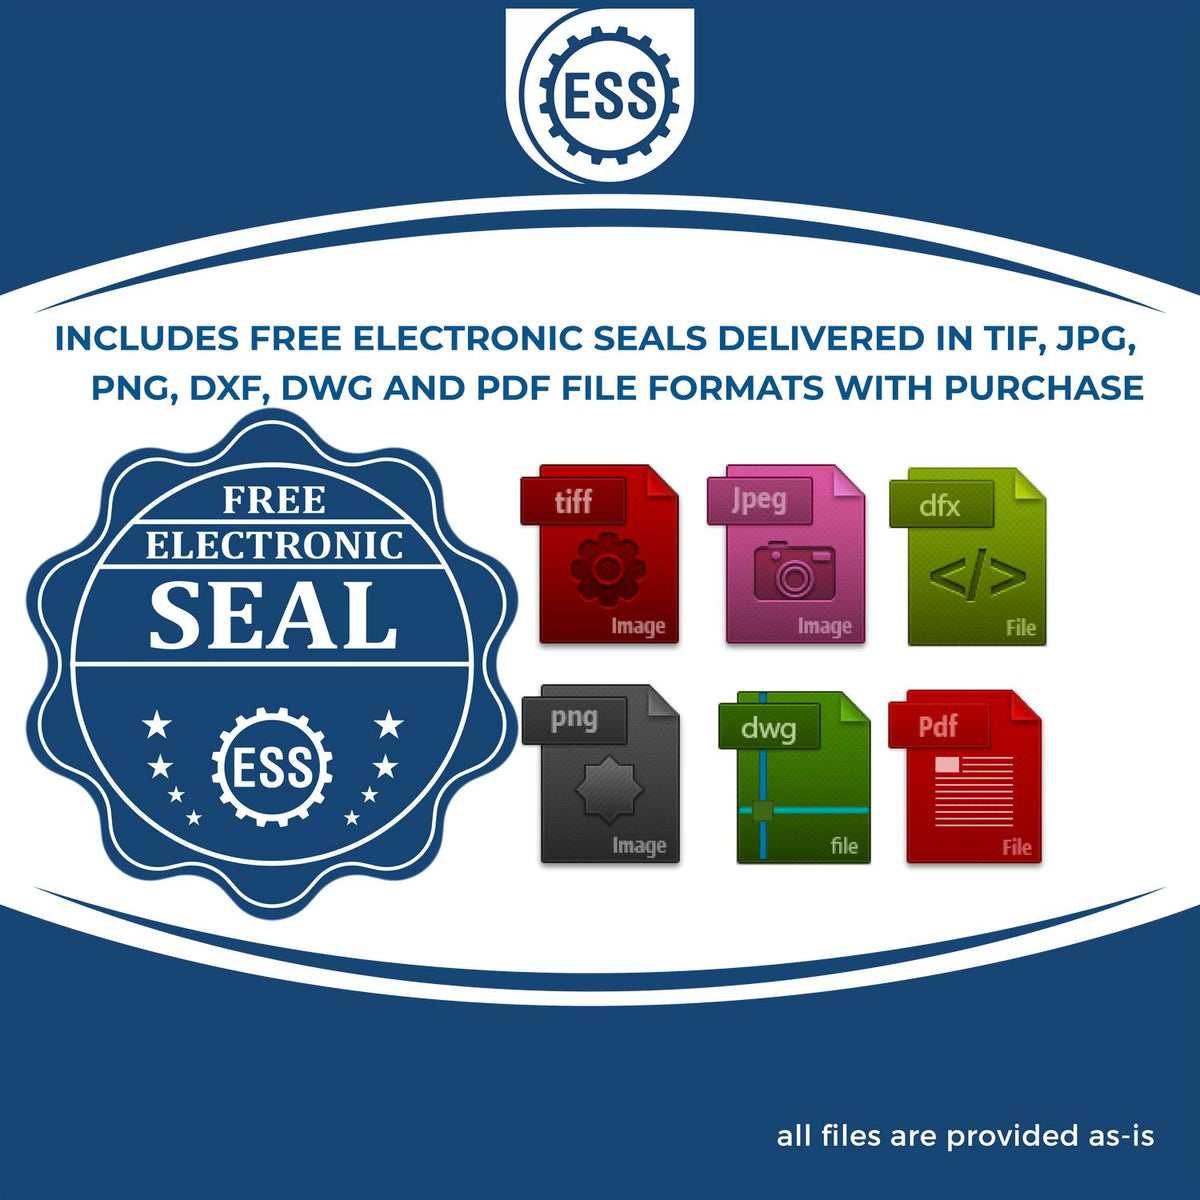 An infographic for the free electronic seal for the Hybrid Arizona Engineer Seal illustrating the different file type icons such as DXF, DWG, TIF, JPG and PNG.